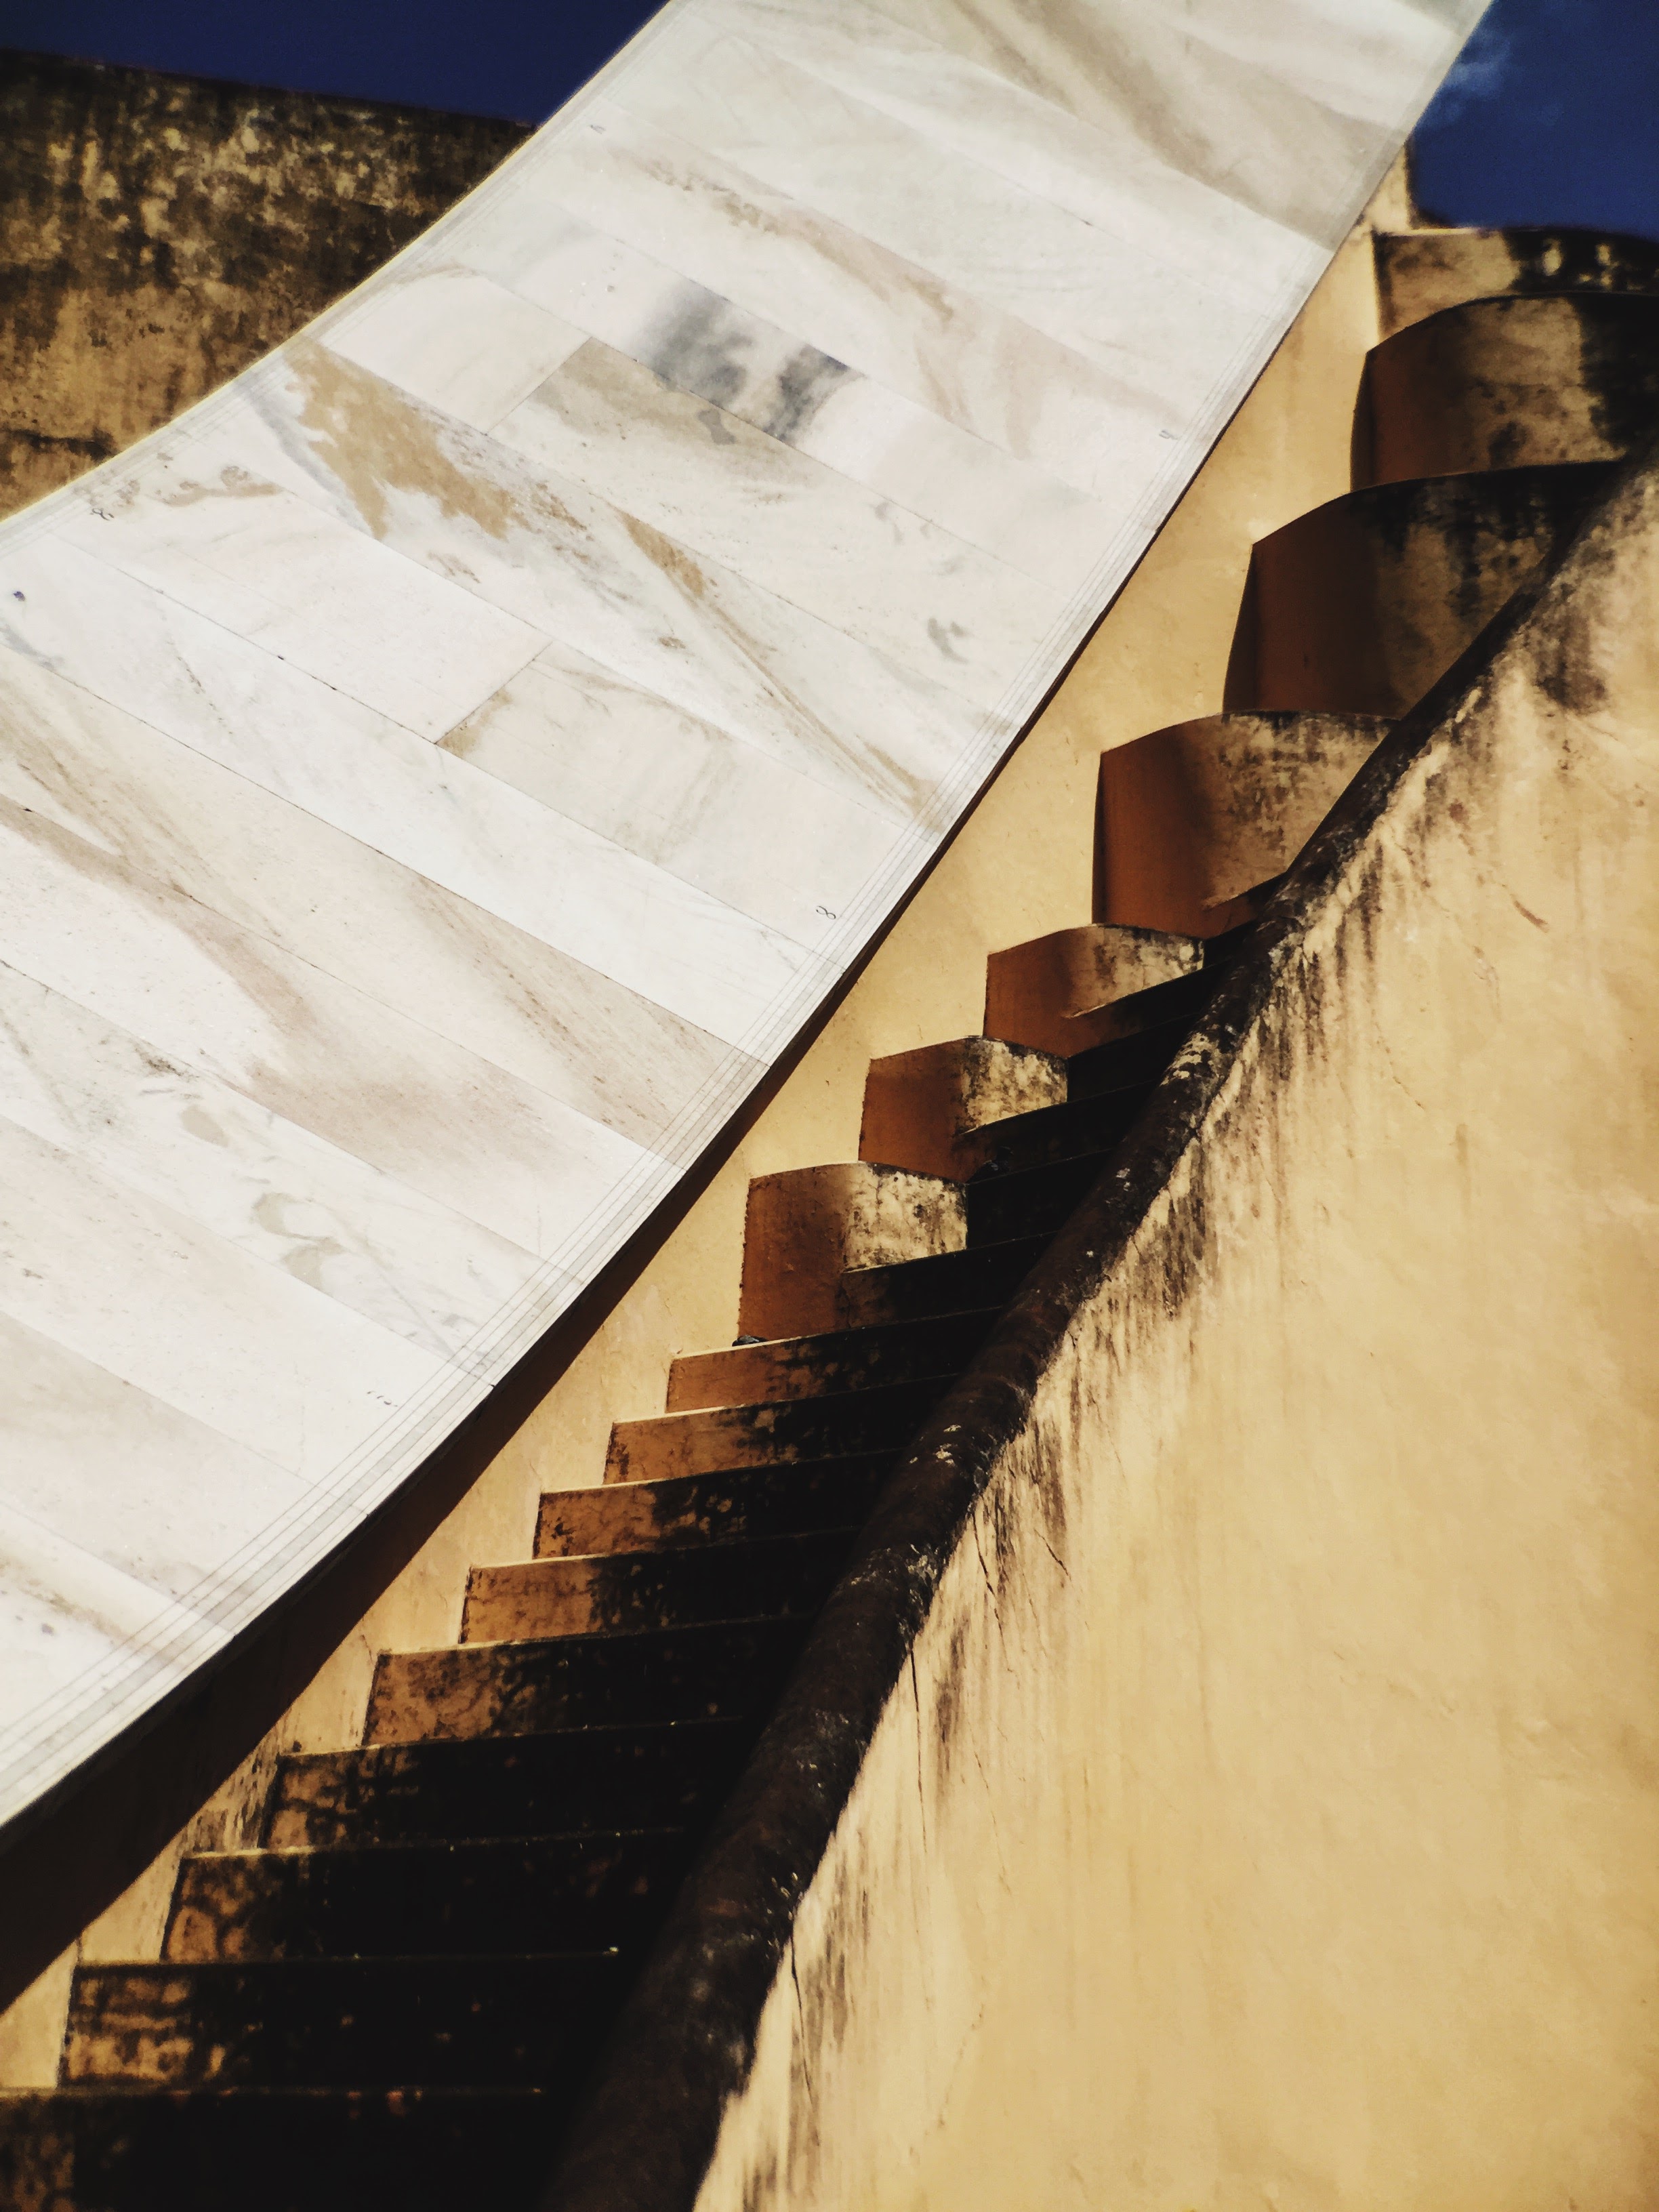 The McHowe World Tour - Part II- Jaipur the Pink City - Jantar Mantar Observatory